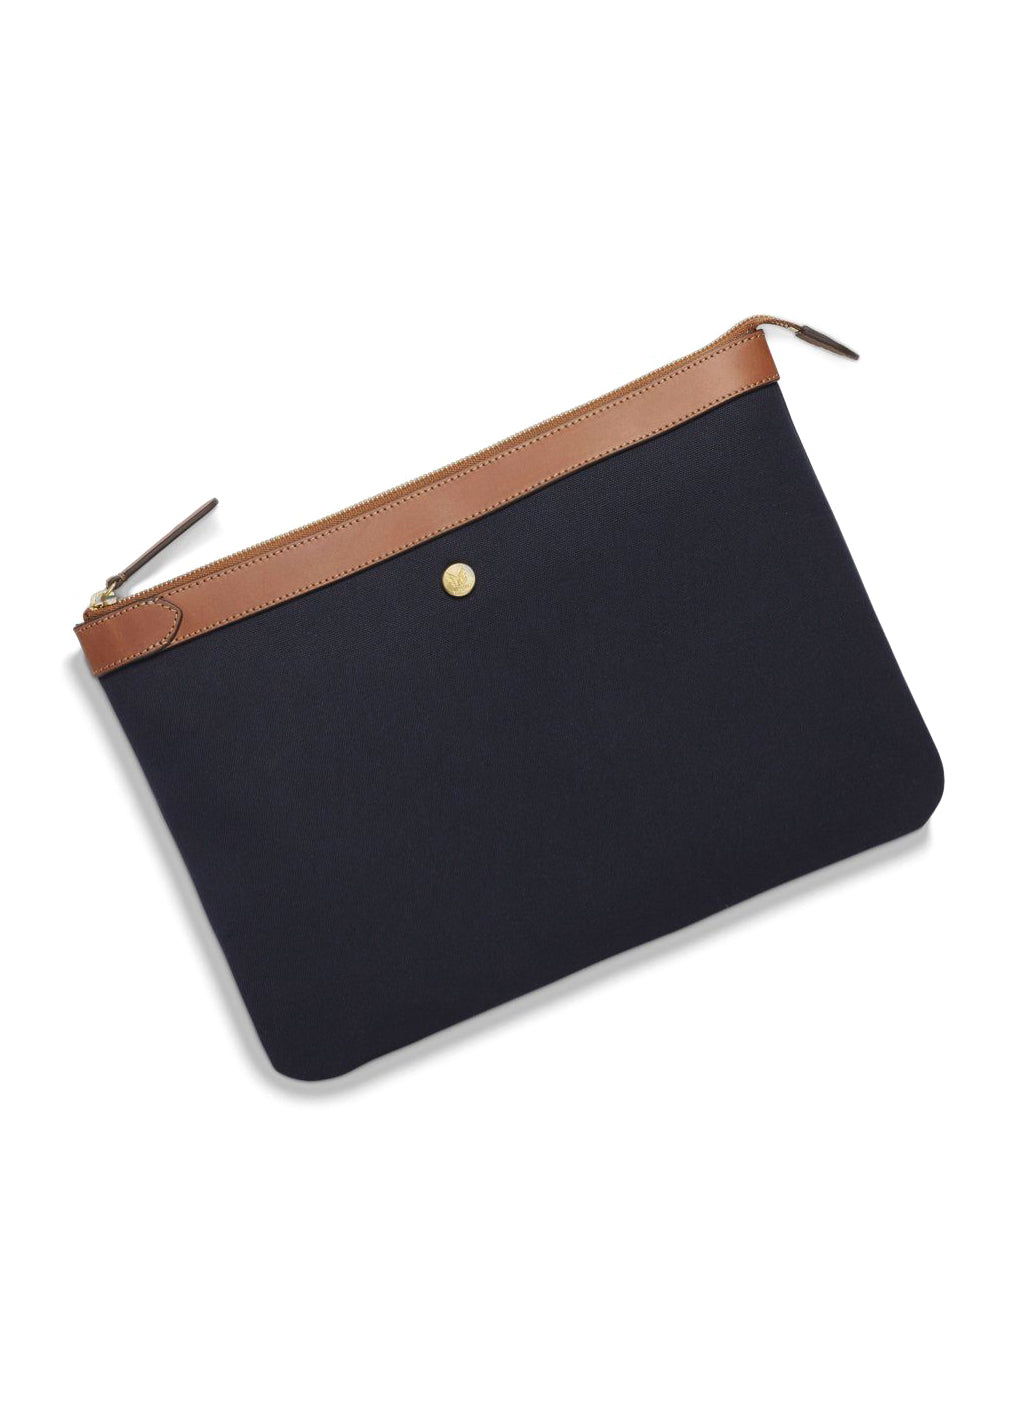 M/S POUCH LARGE | Midnight Blue/Cuoio